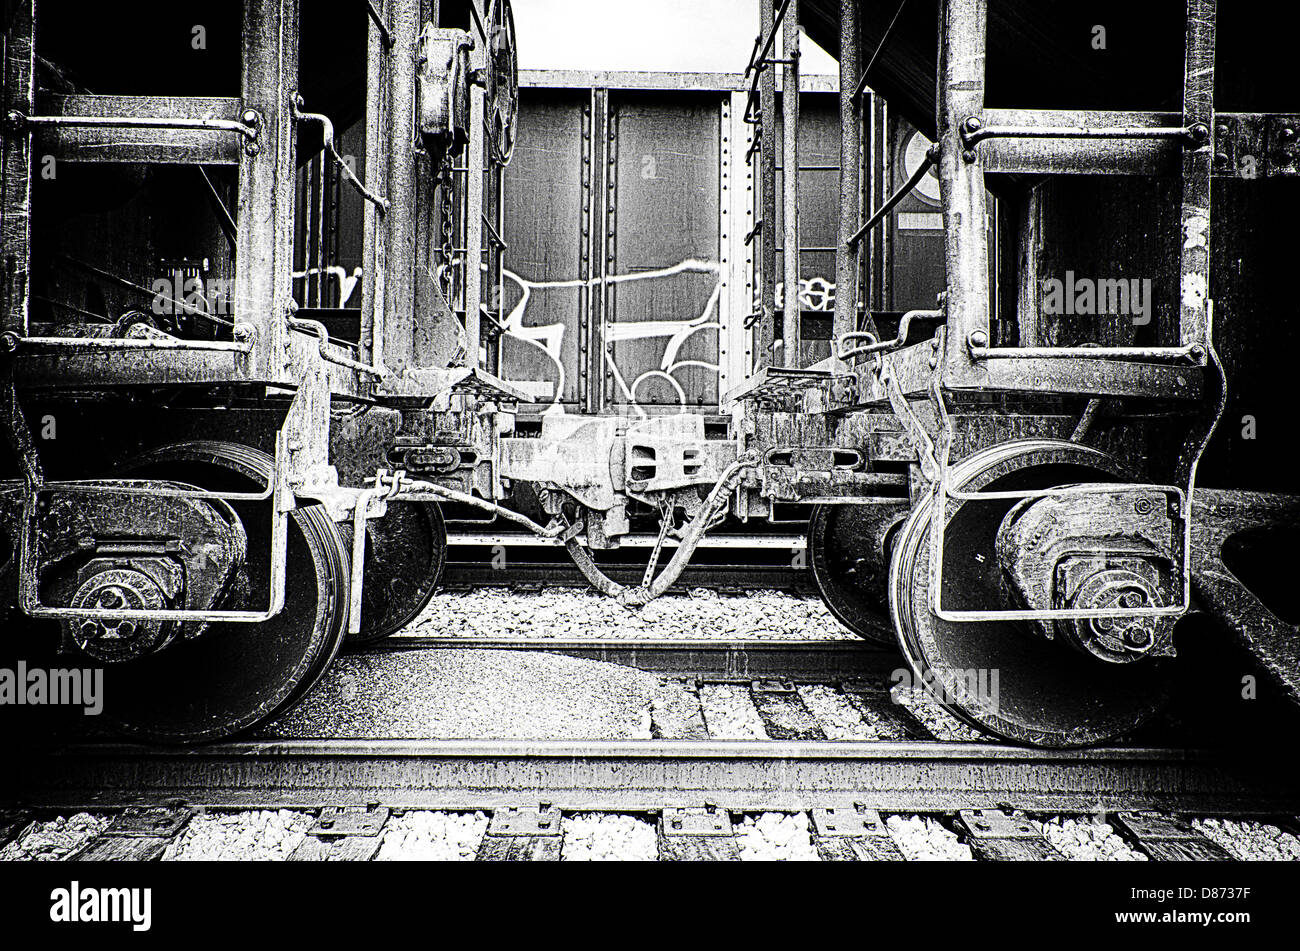 This is a black and white closeup image of train cars coupling. Stock Photo